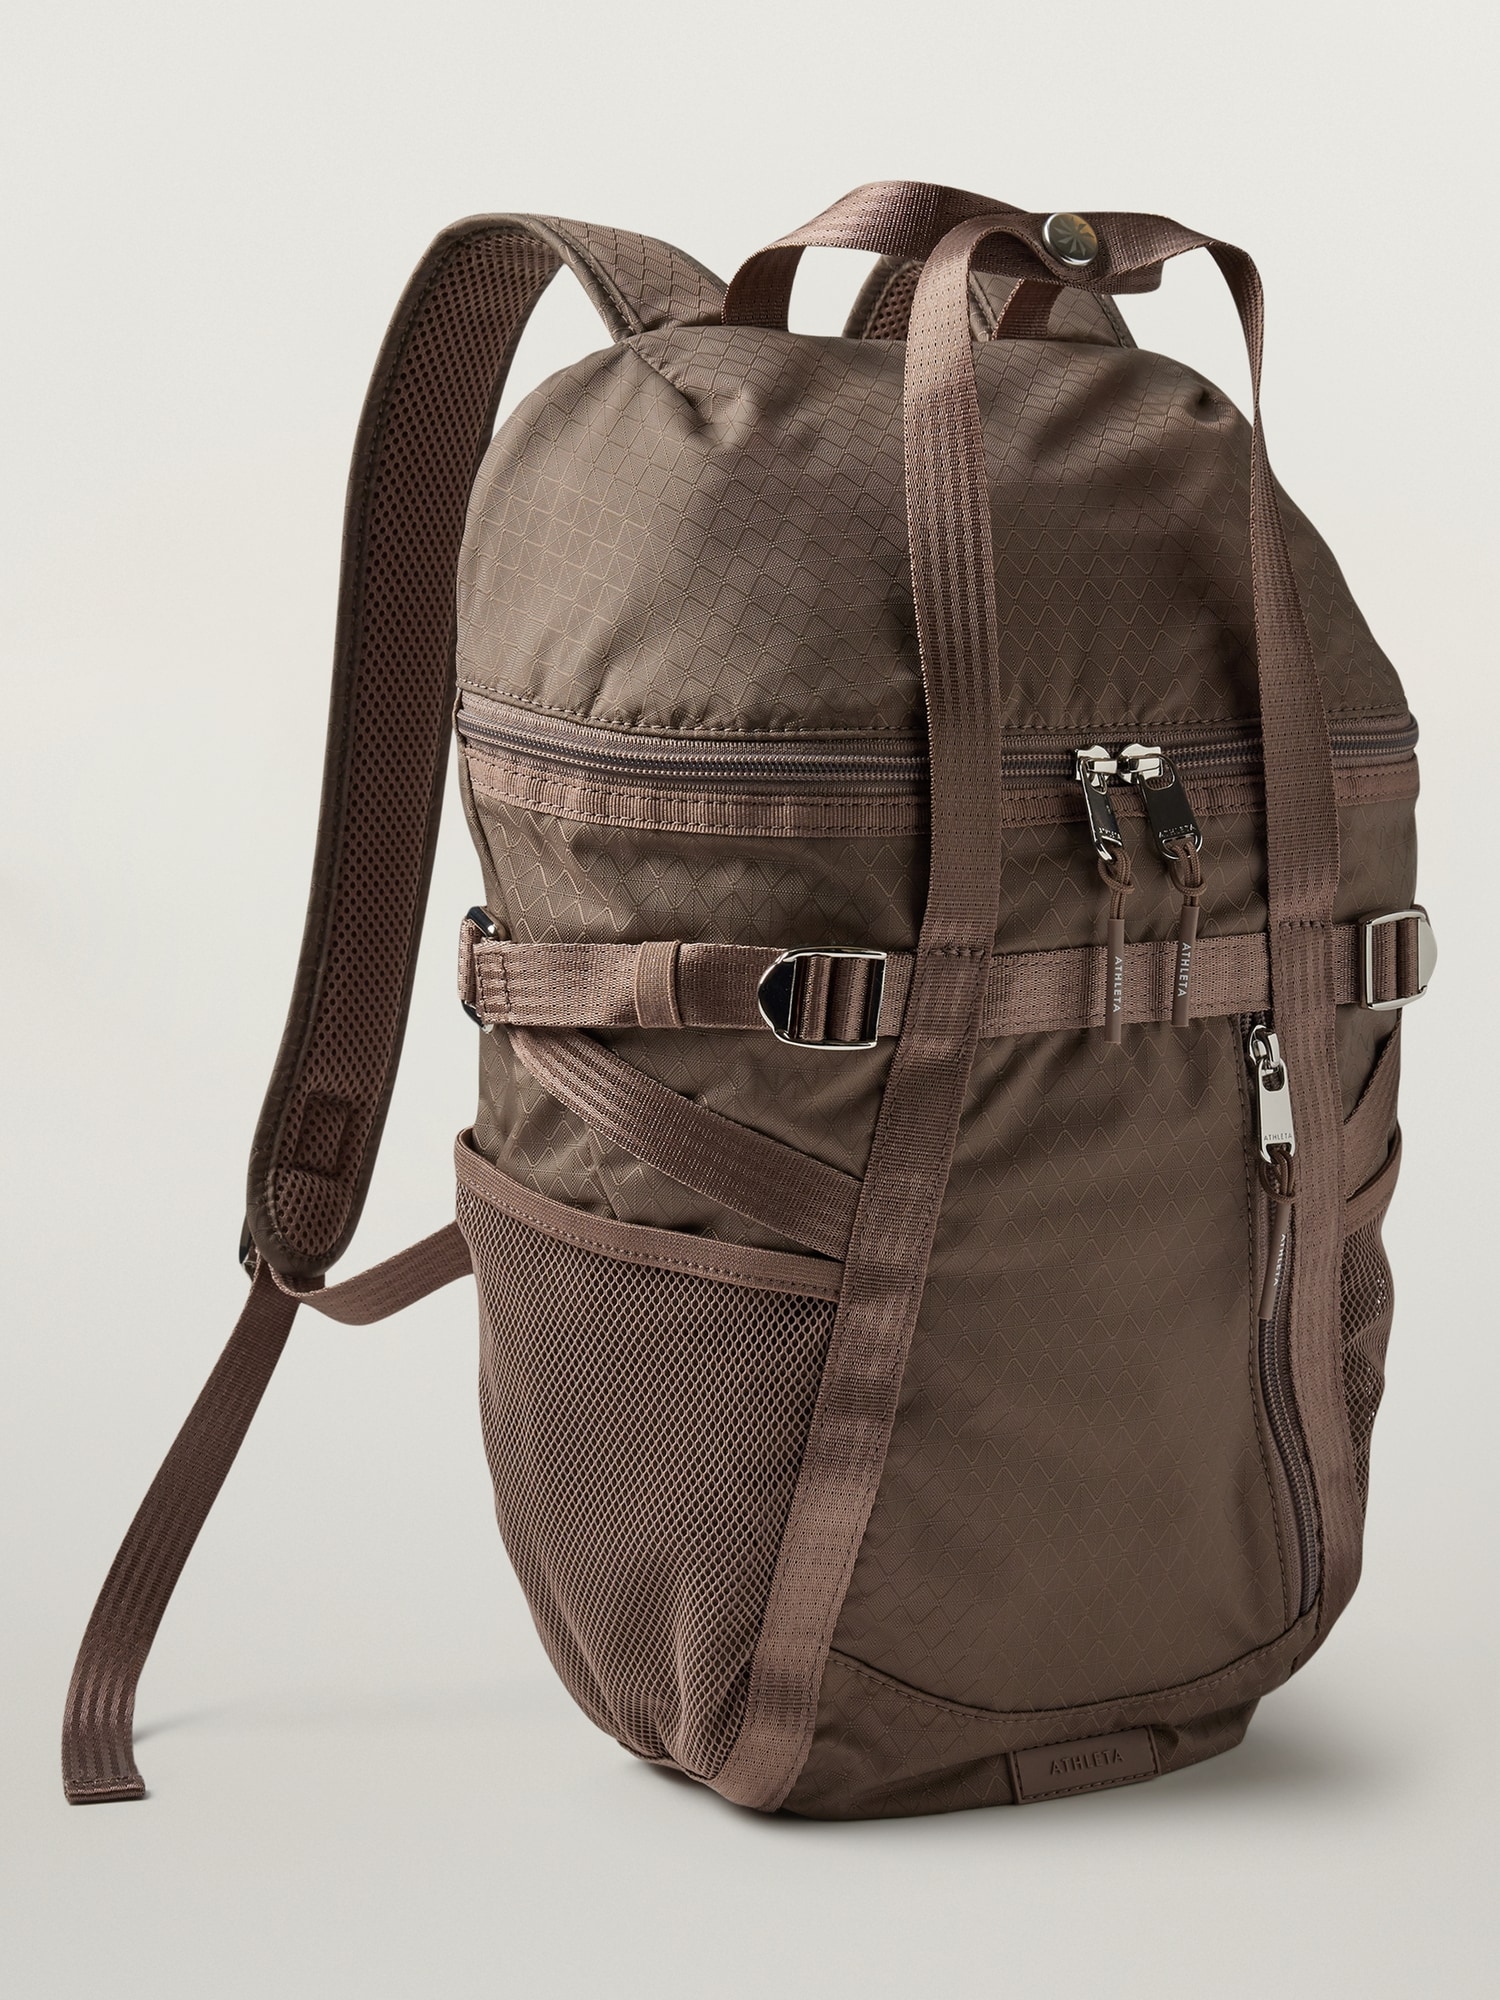 Athleta GAP Excursion Olive Green Backpack ~ camping, school, travel